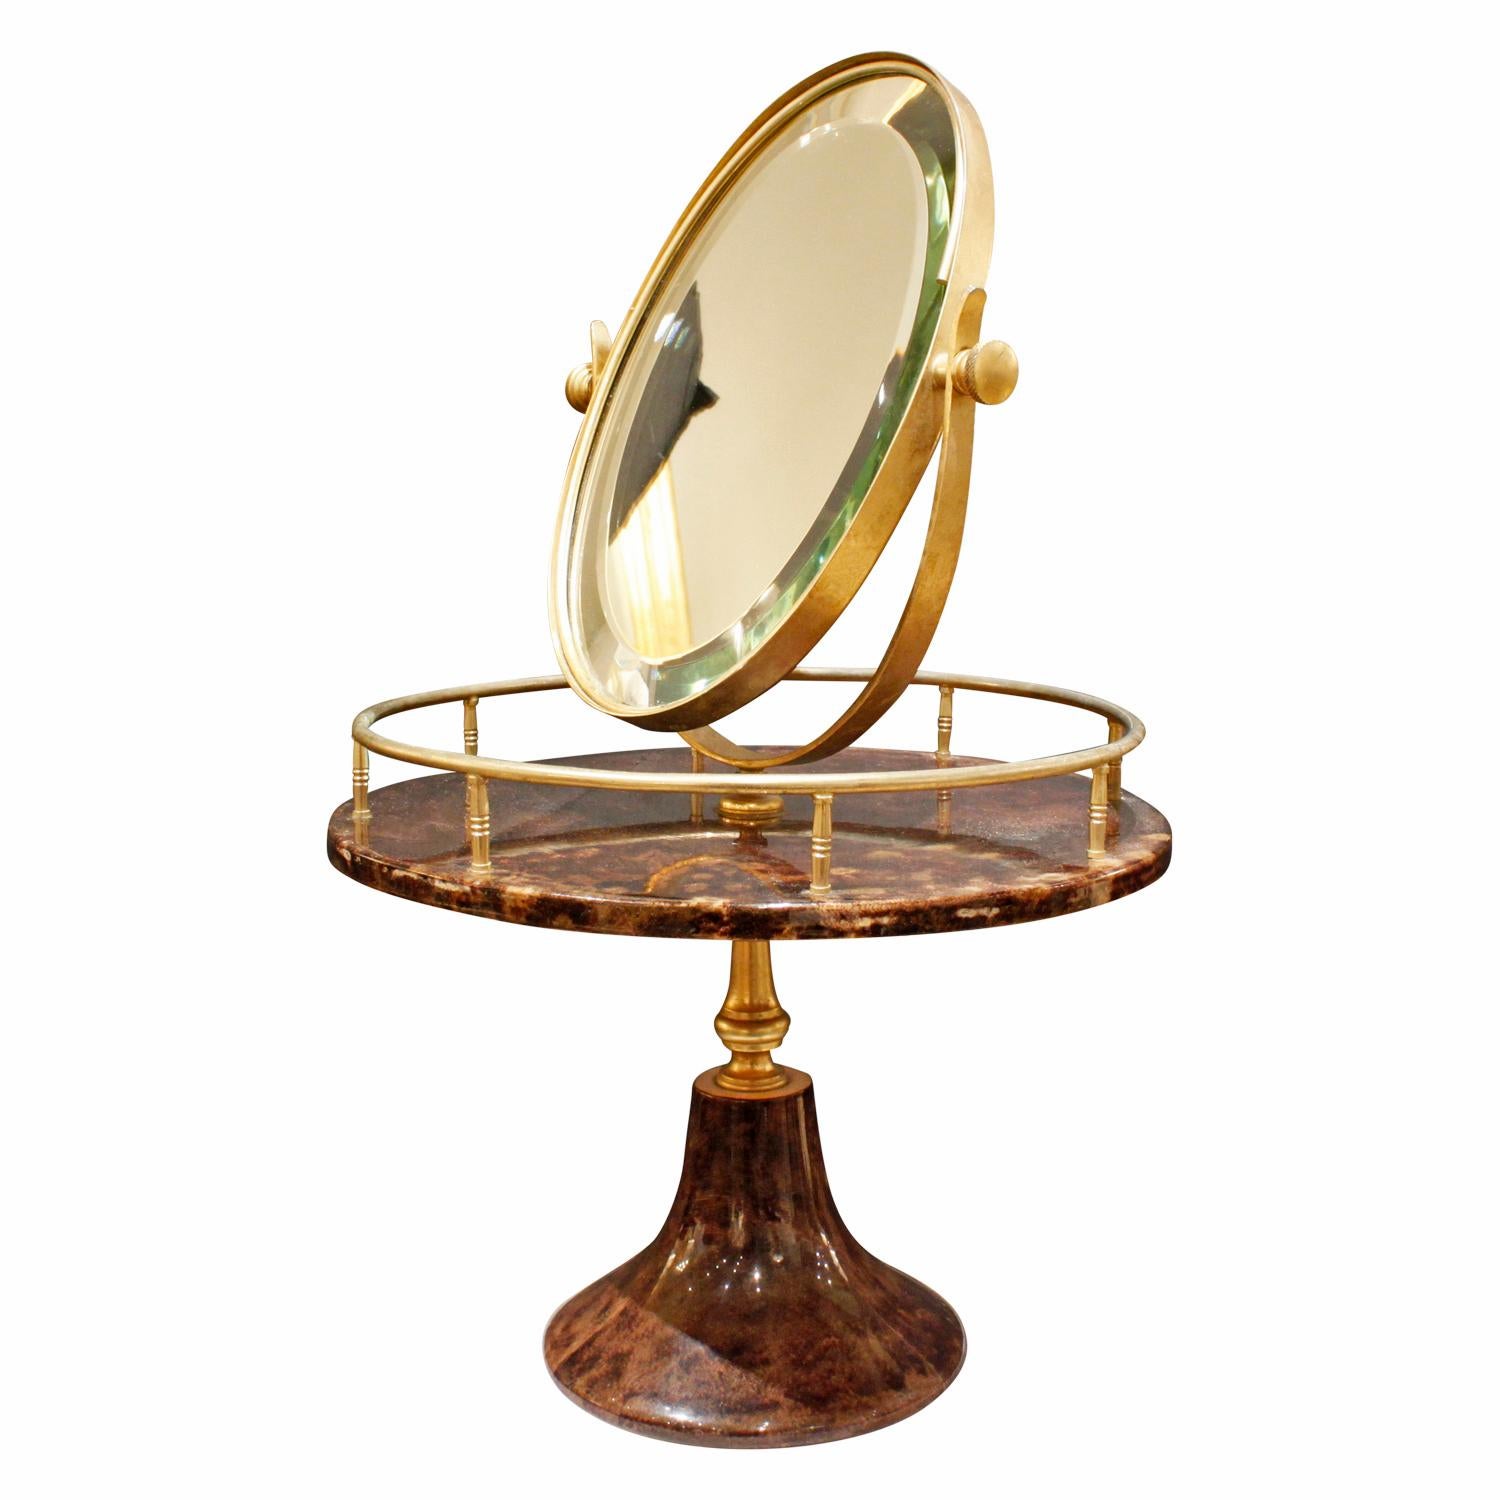 Adjustable vanity mirror with base in lacquered chocolate goatskin with gold-plated hardware by Aldo Tura, Milan Italy, 1970s (signed on bottom). This piece is rare and very luxurious.